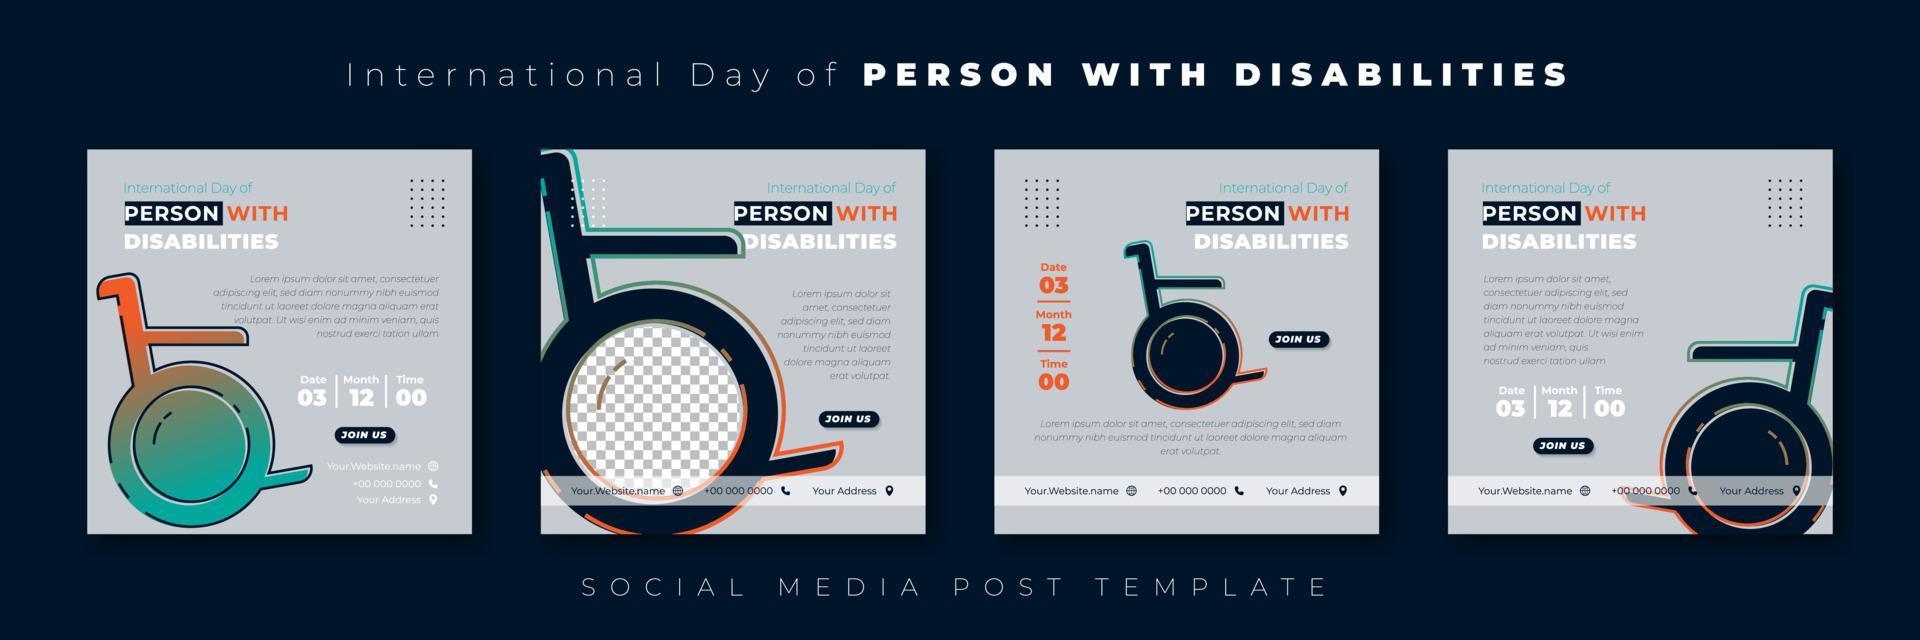 Set of social media post template with Black wheelchair design. International day of person with disabilities template design. vector